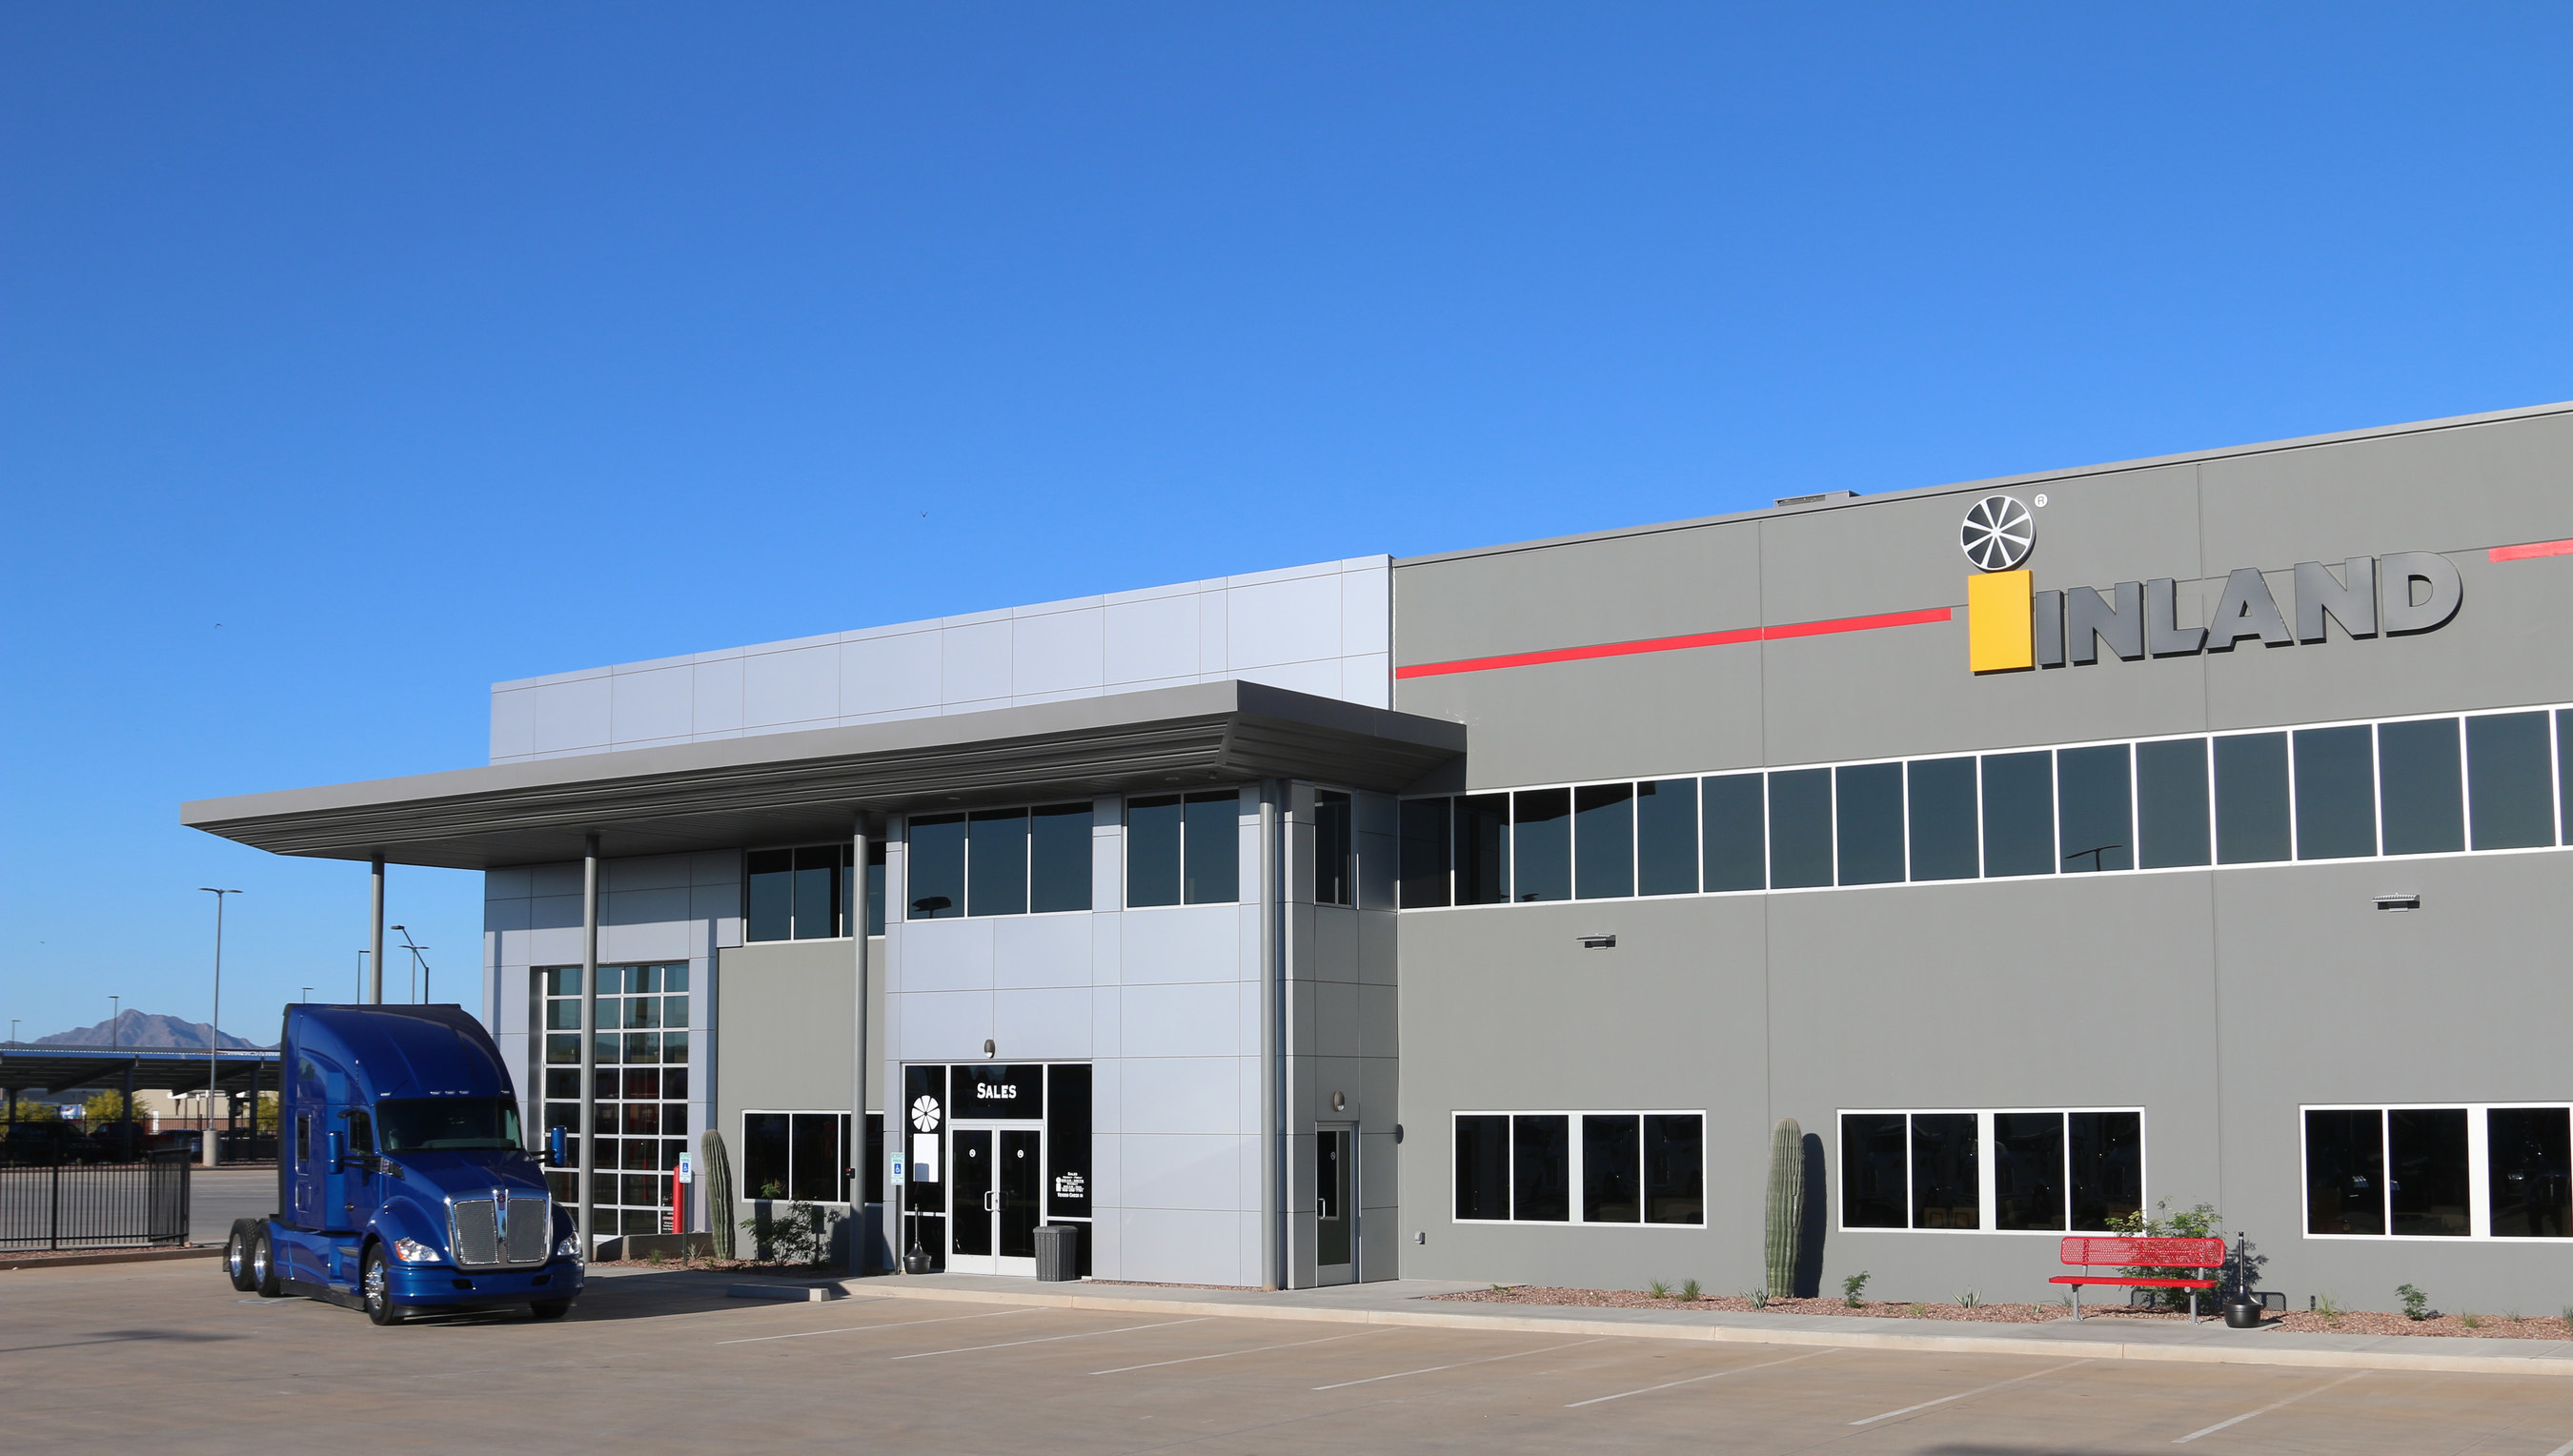 Inland is a heavy truck and equipment dealership with 23 locations throughout British Columbia, the Yukon, Southern California, Arizona and New Mexico.